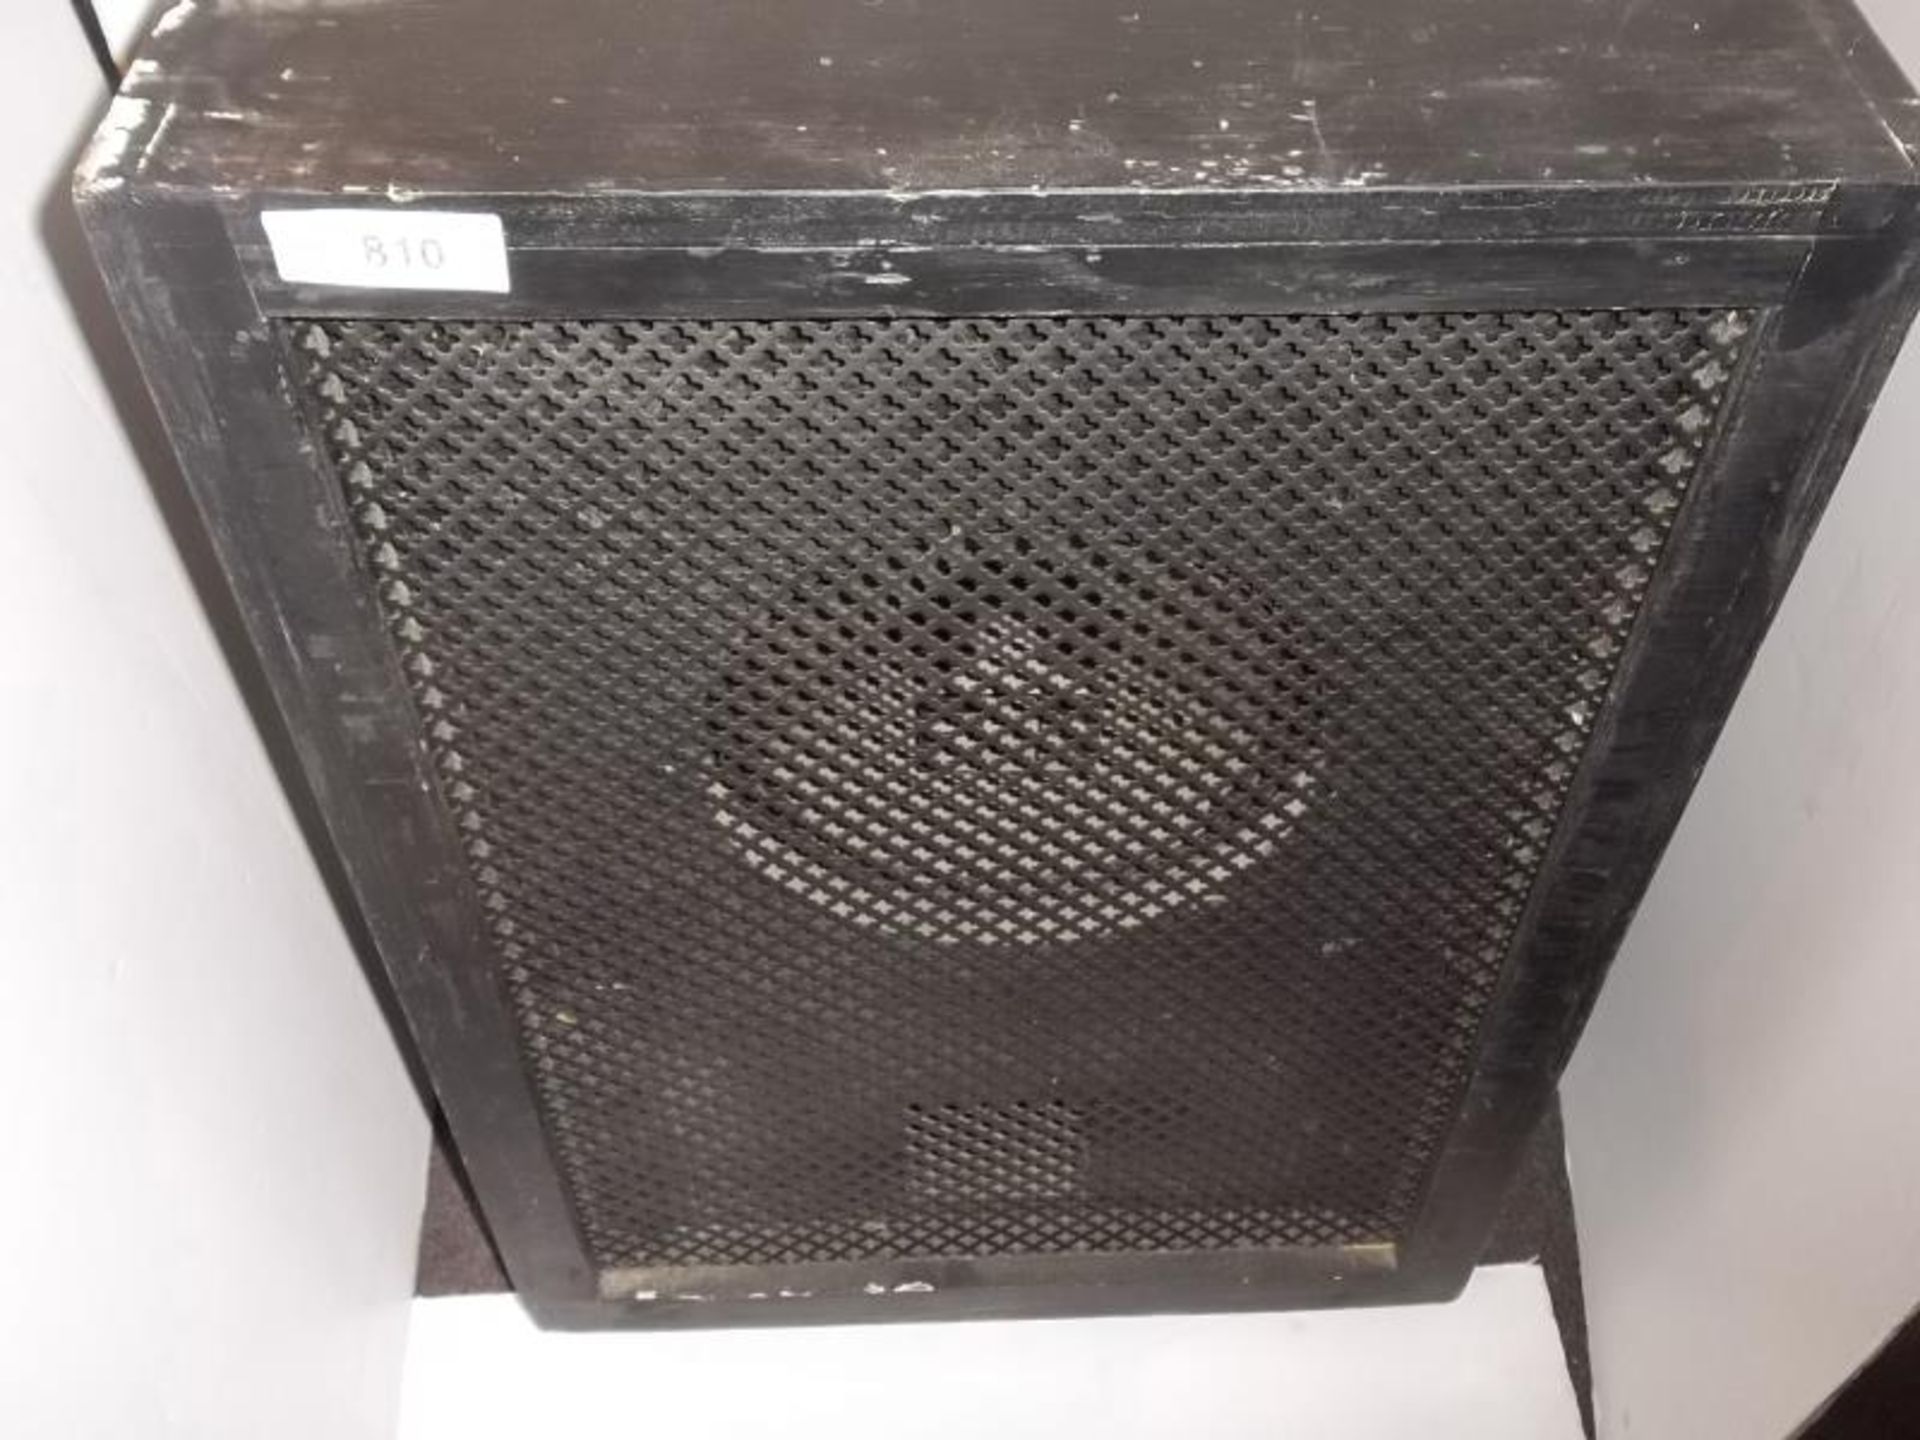 Pair of Altec speaker cabinets, painted black with one speaker in each, some damage to screens and